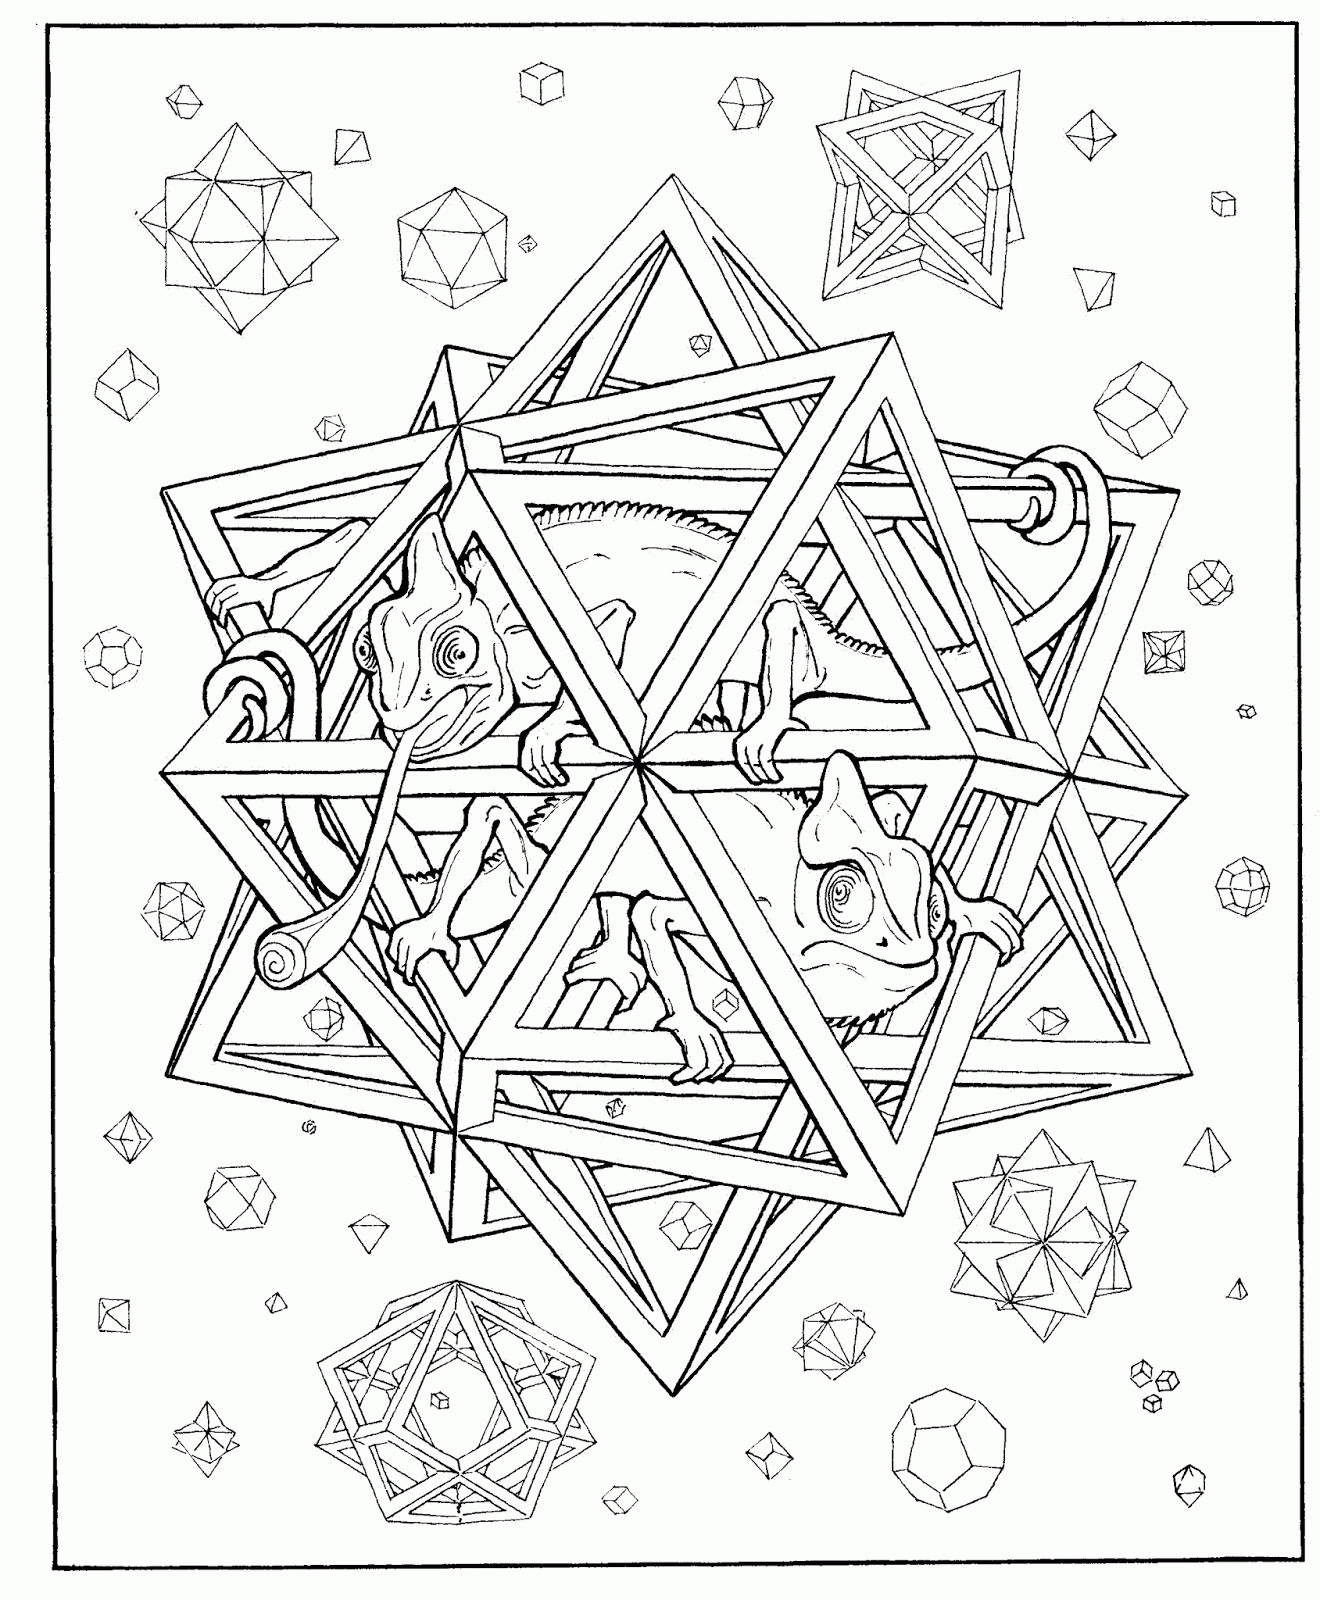 3D Coloring Pages For Adults
 50 Trippy Coloring Pages